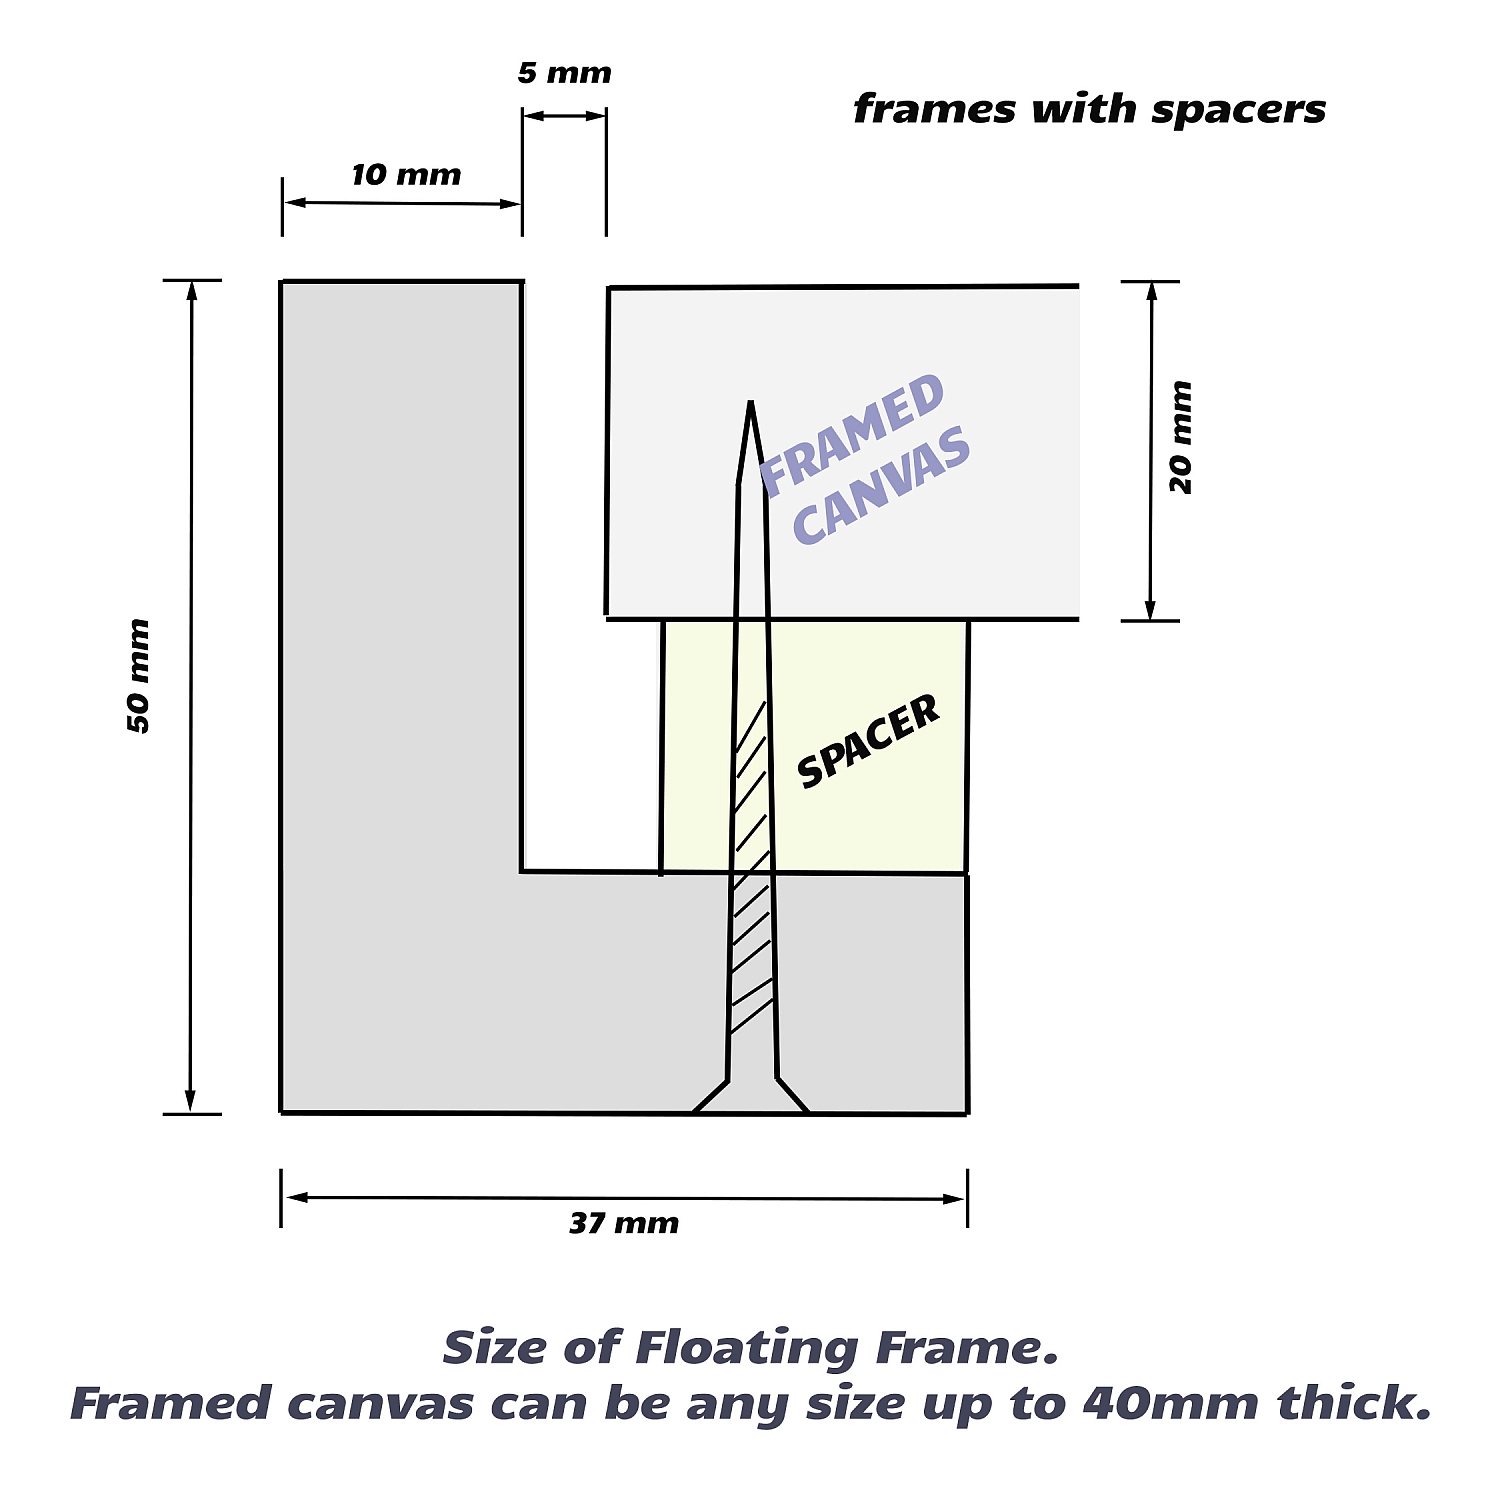 Prime - Float Tobacco Moulding Frame (Shadow Box Frame), DIY Canvas kit | Drawing_for_floating_frame_with_20mm_canvas.jpg